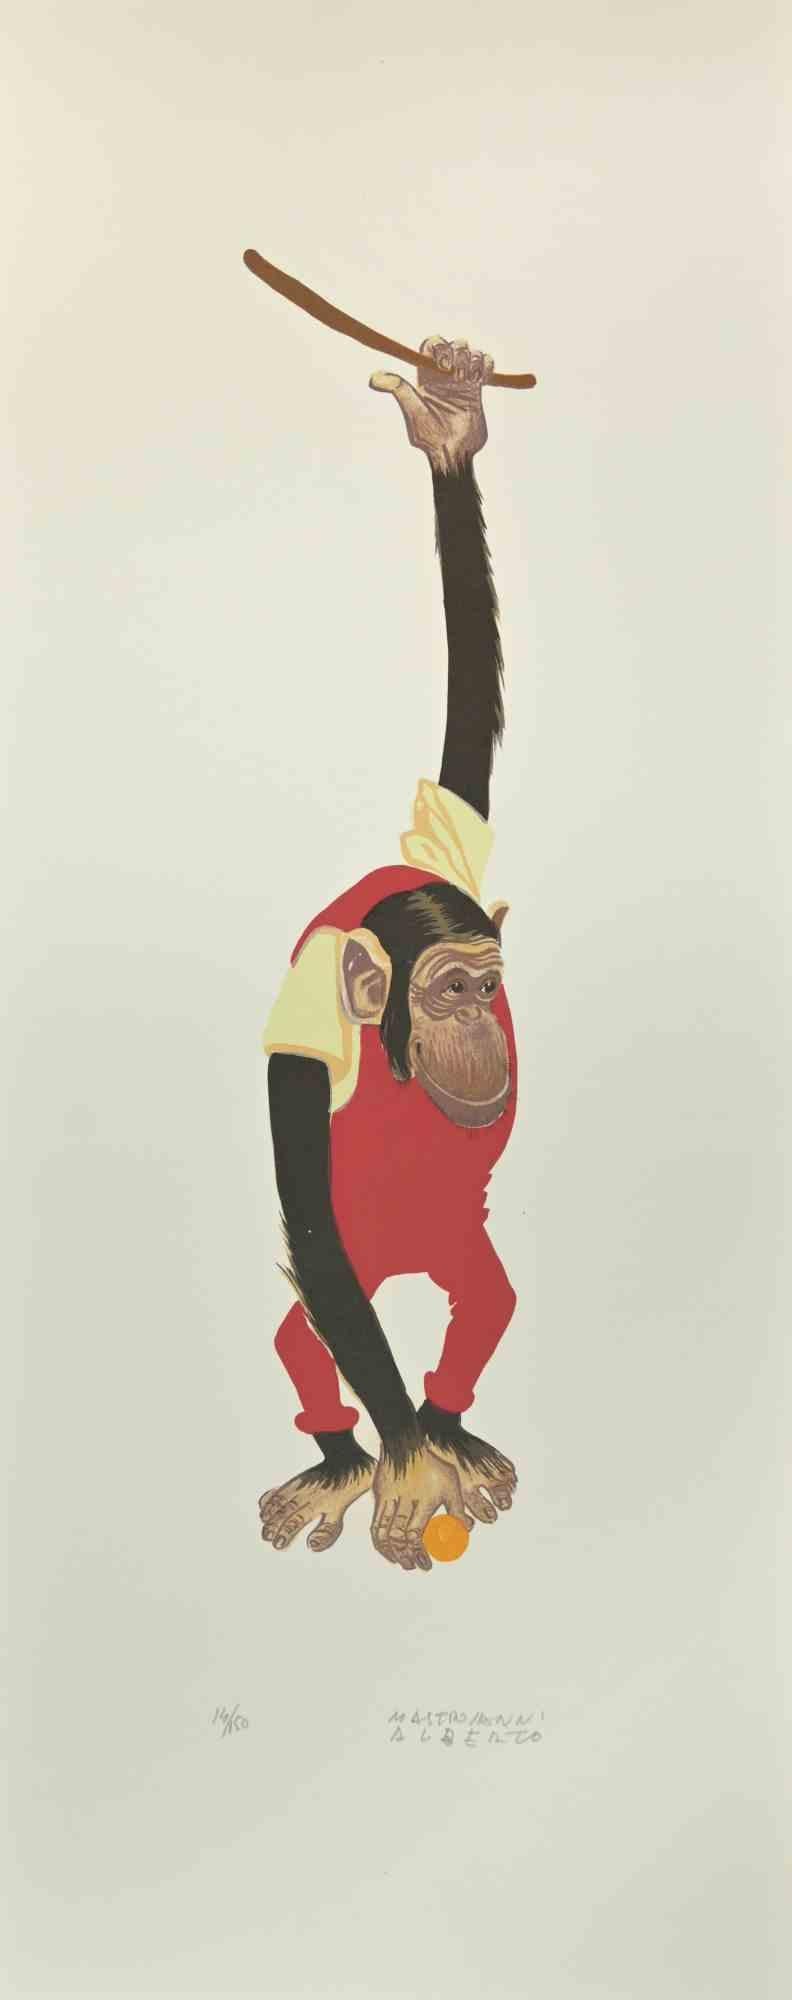 Monkey is a lithograph realized by Alberto Mastroianni in the 1970s.

Hand Signed on the lower right margin. Numbered on the lower margin in pencil. from the edition of 150 prints.

The artist's efforts indicate the perfect application of aesthetic